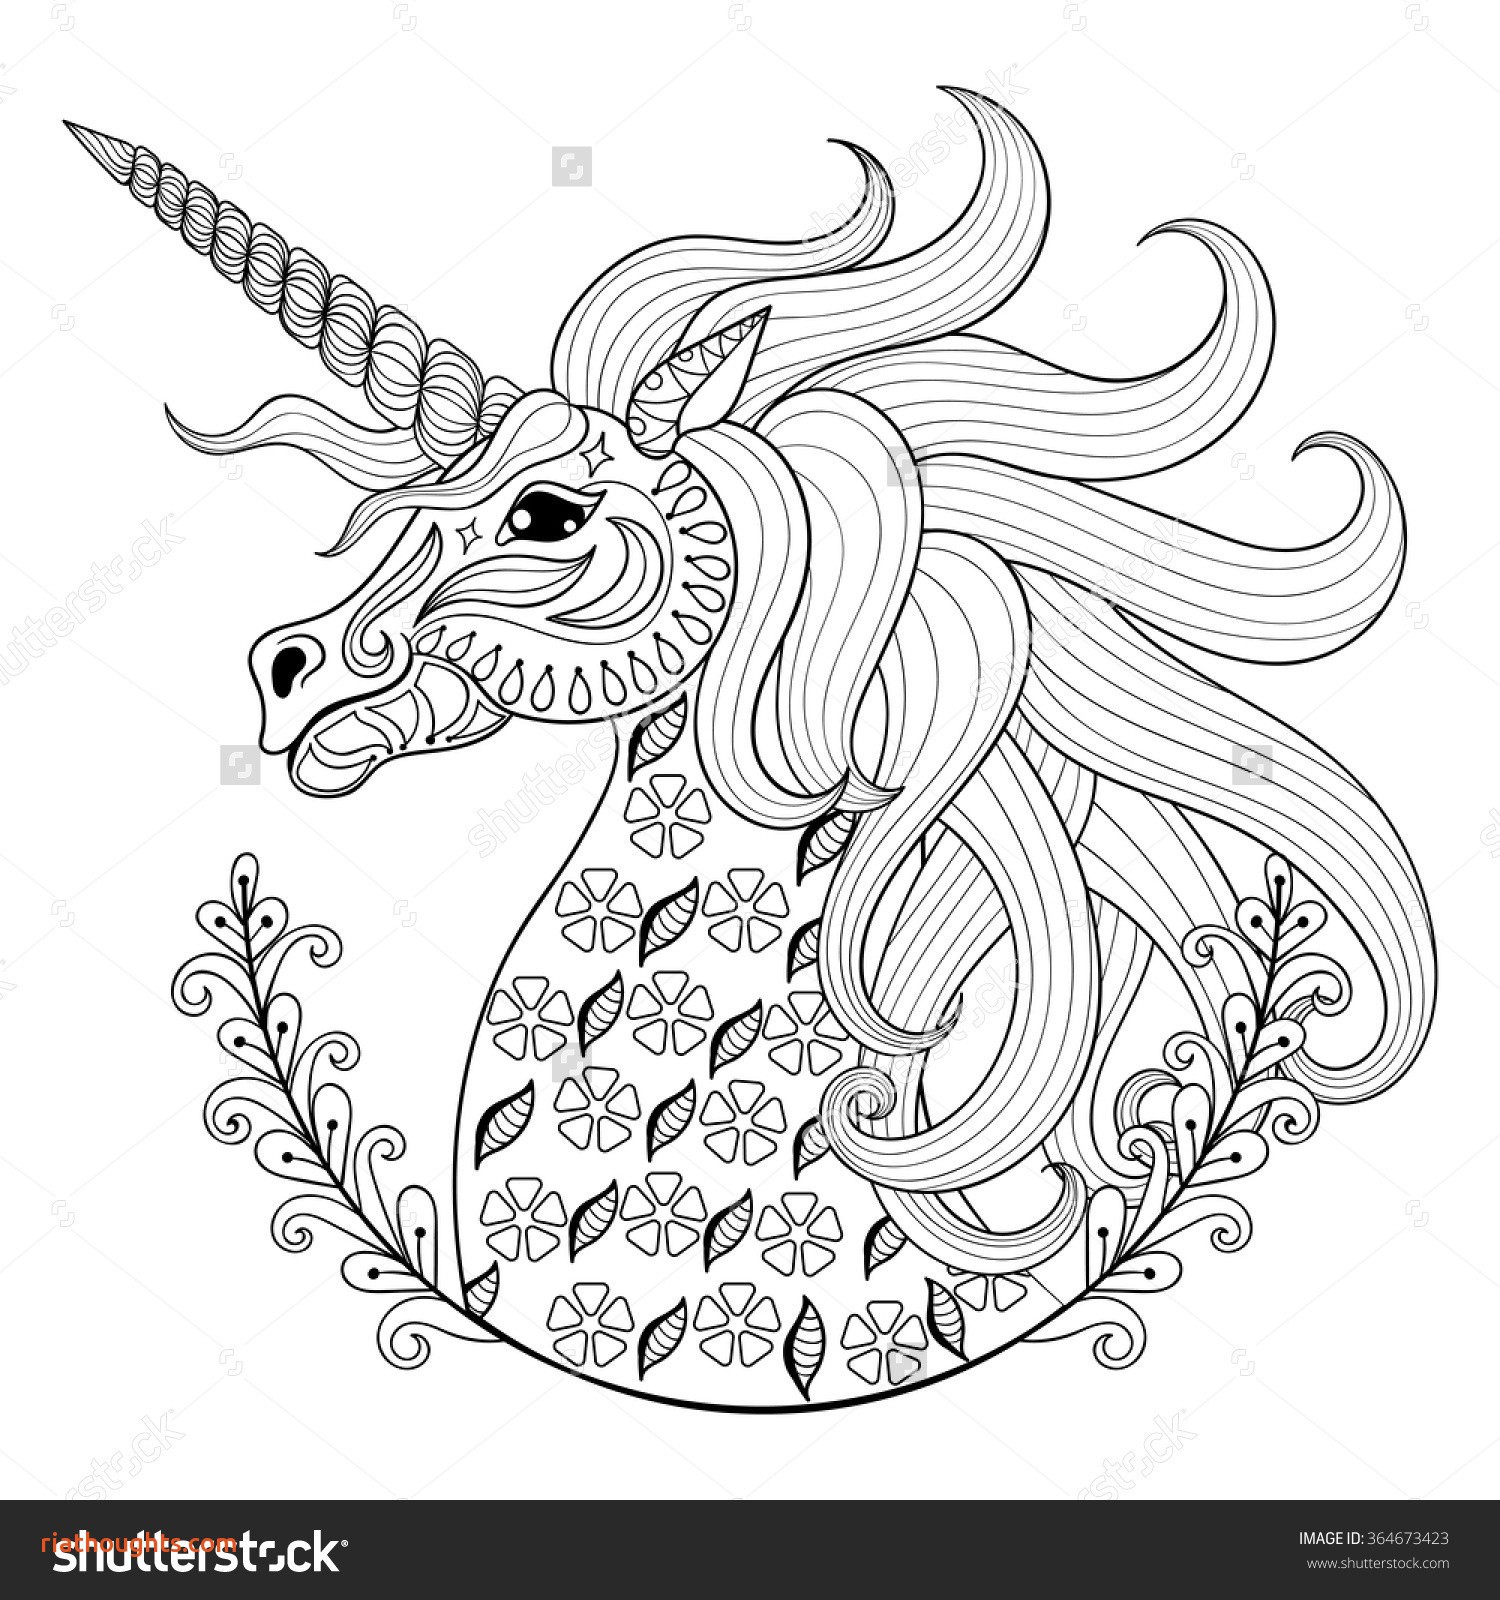 Awesome Category All Coloring Page 0